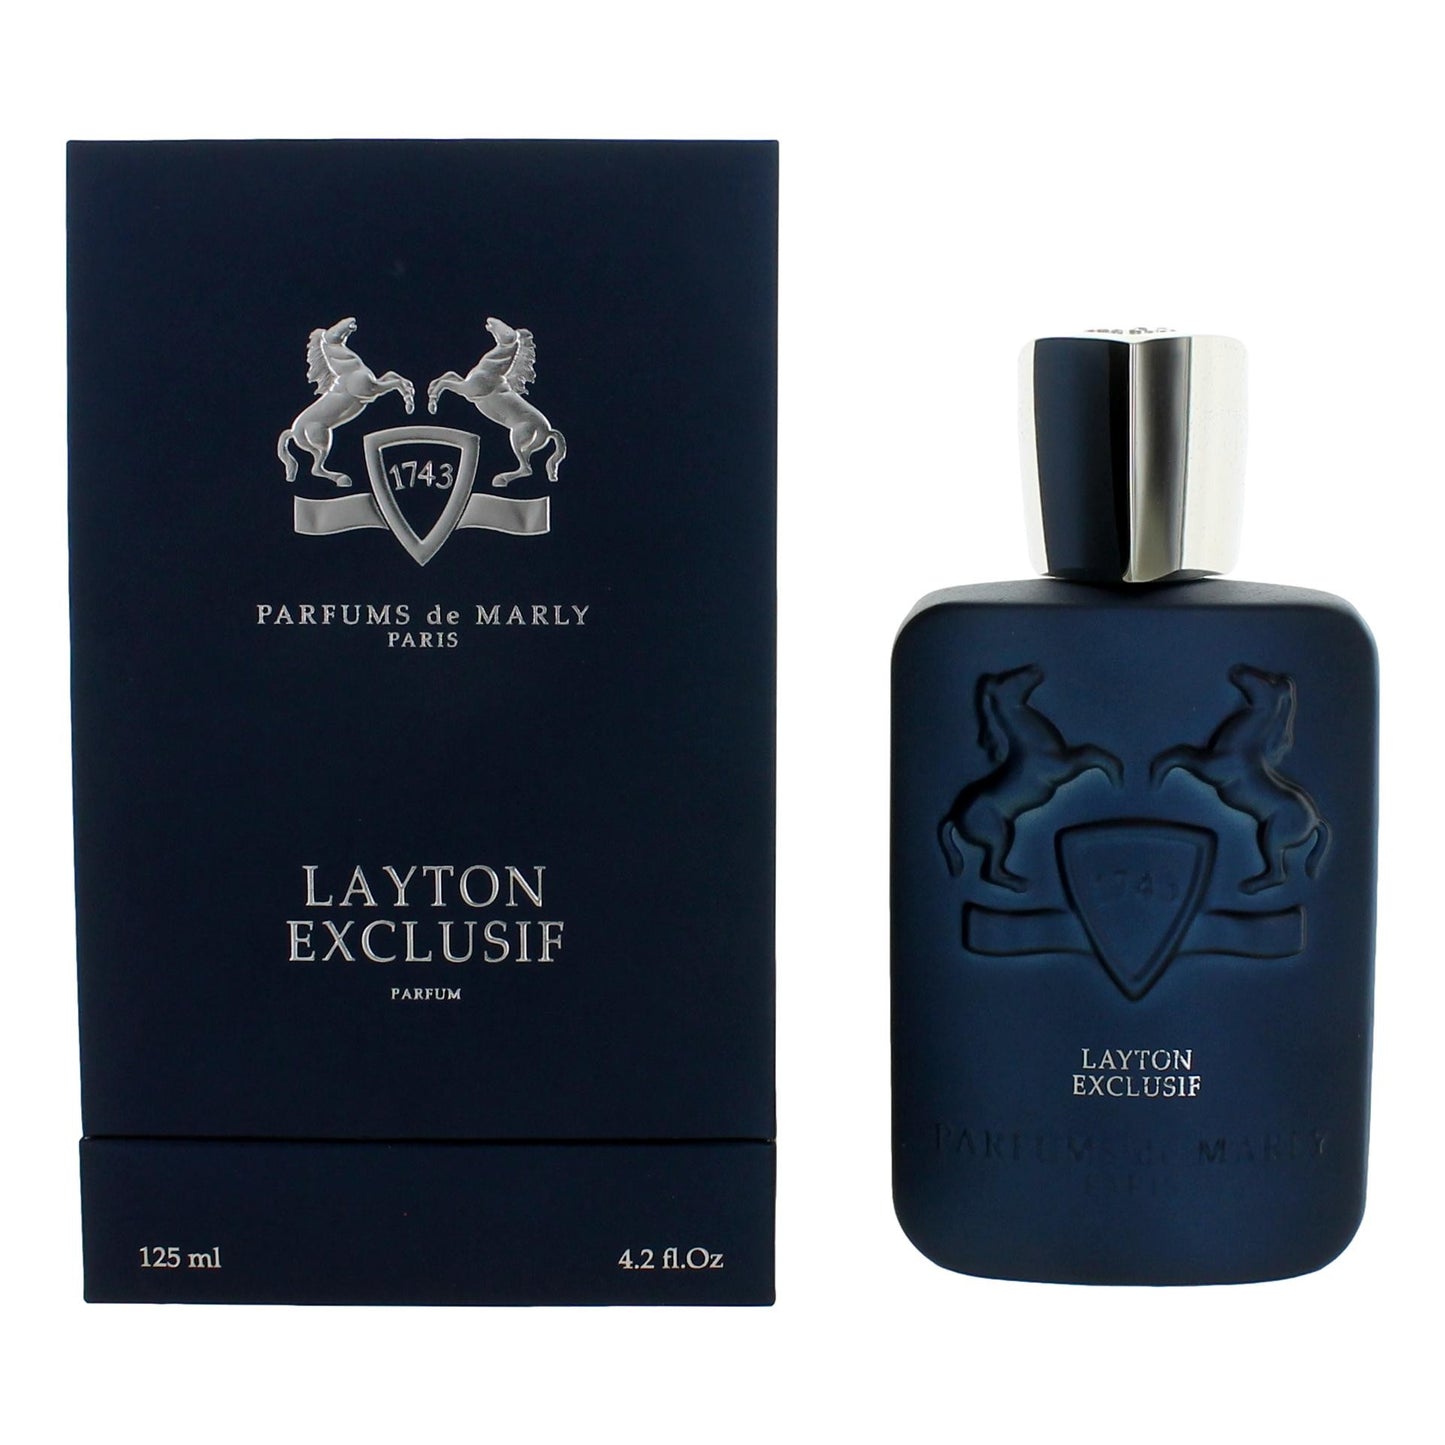 Parfums de Marly Layton Exclusif by Parfums de Marly